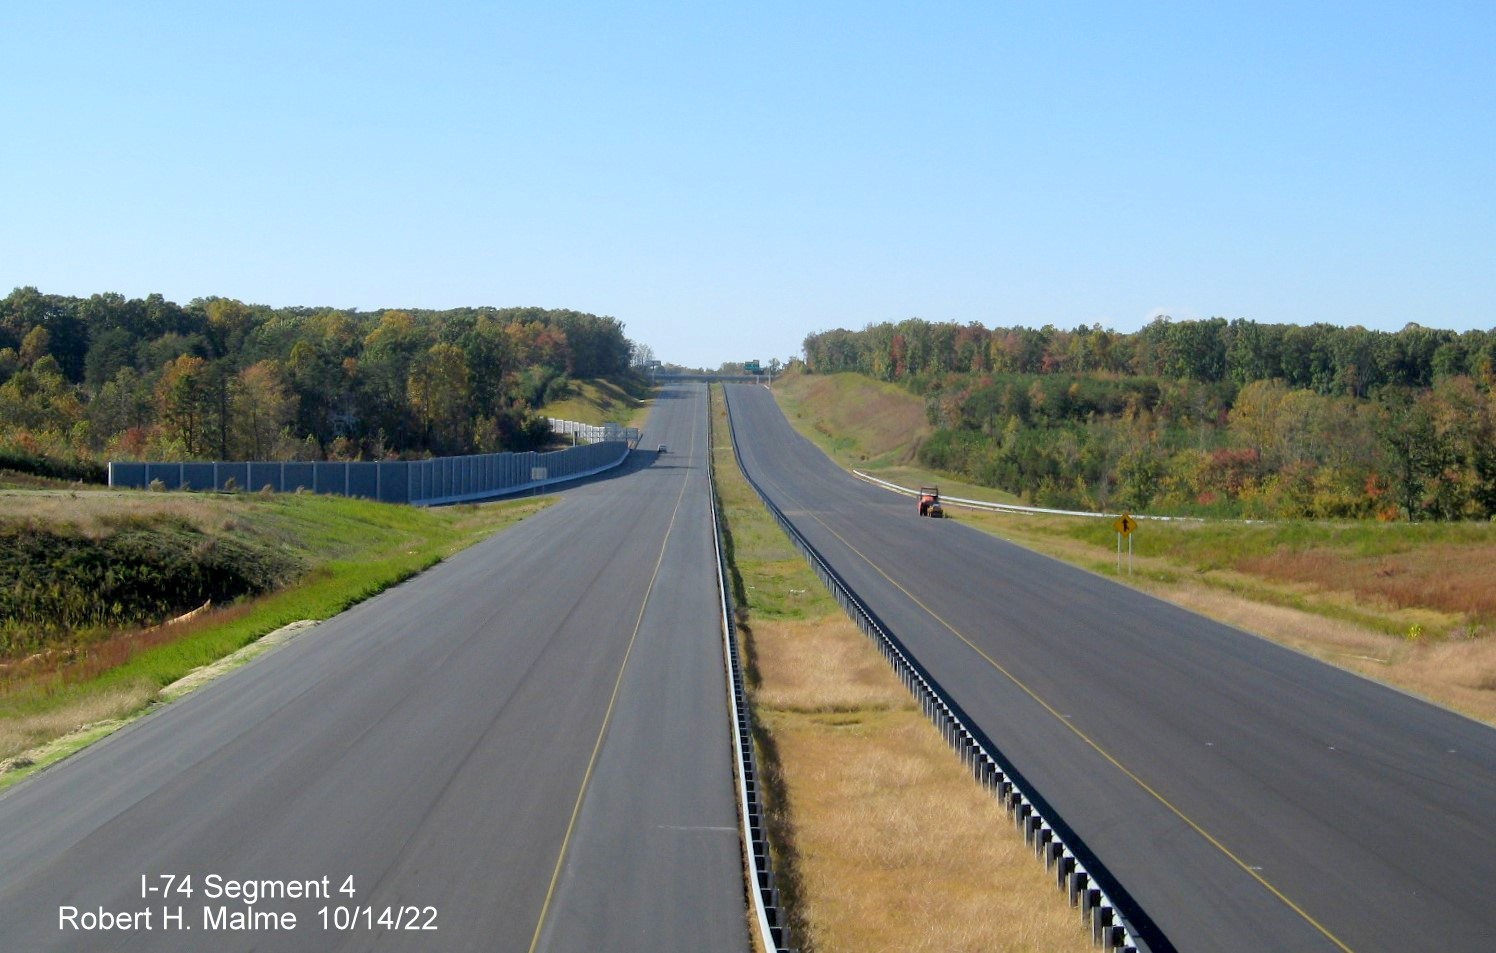 Image of view looking north from middle of NC 8/Germanton Road bridge over unopened section of NC 74 (Future I-74) 
        Winston-Salem Northern Beltway looking toward NC 66 exit, October 2022